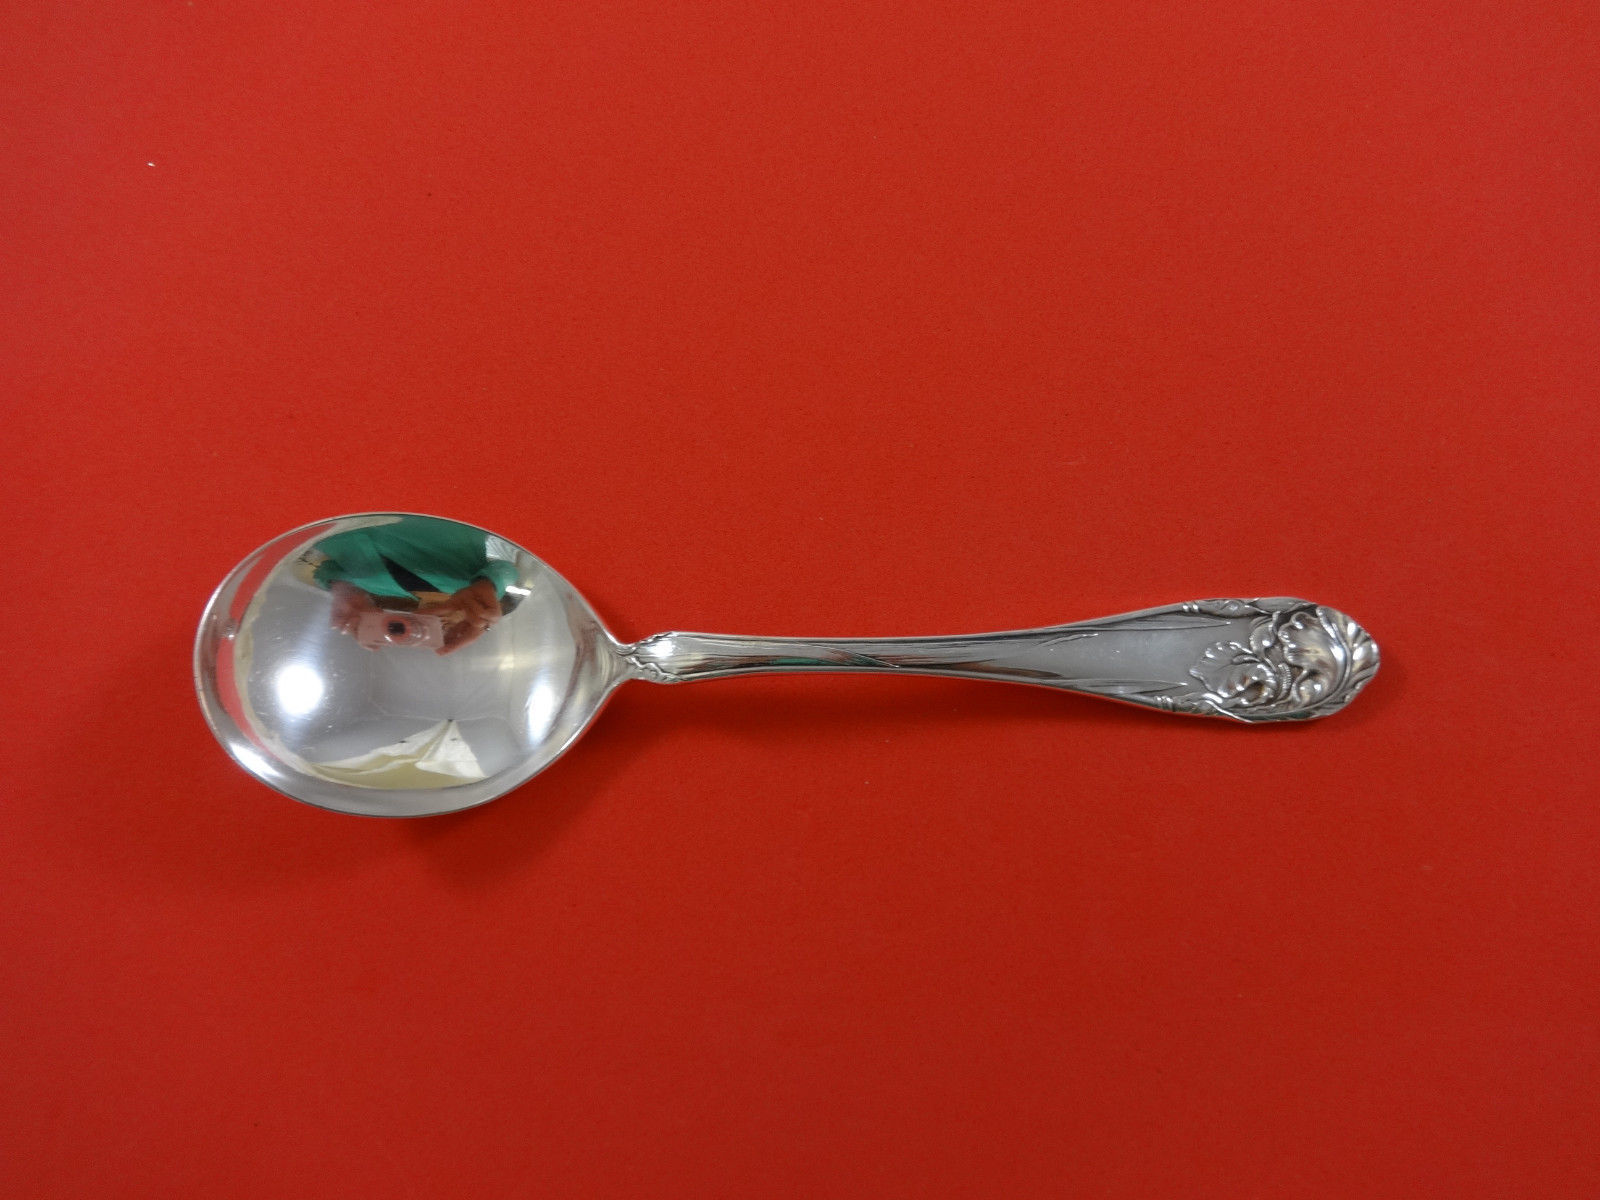 Primary image for Flower Fleur De Luce by Community Plate Silverplate Gumbo Soup Spoon 7"